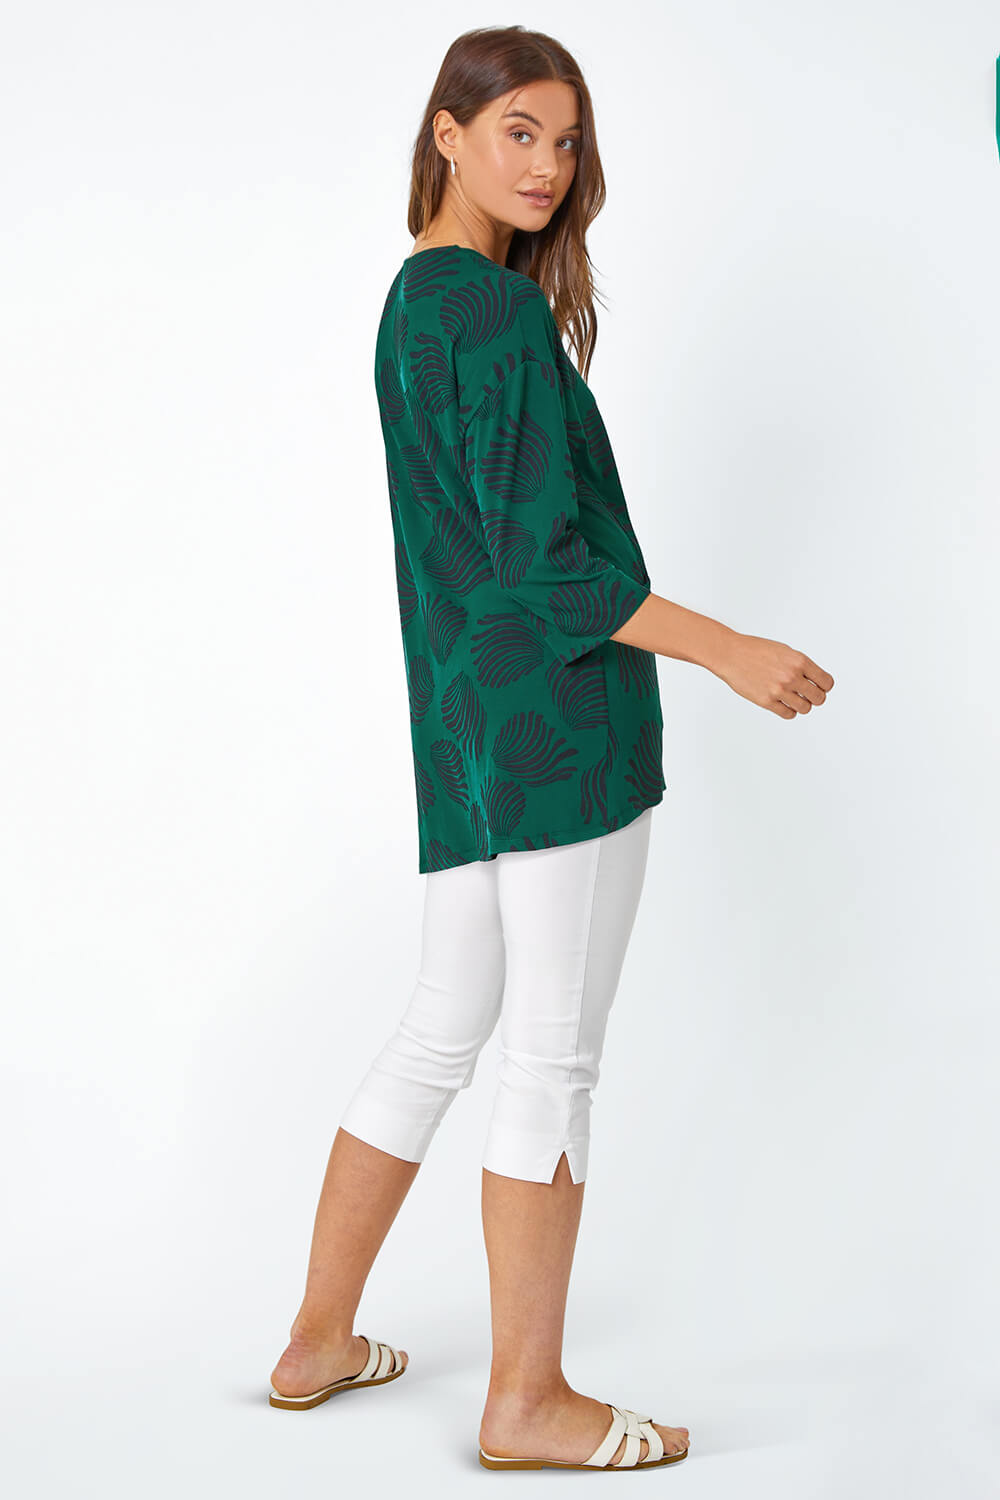 Green Abstract Print Pocket Tunic Stretch Top, Image 3 of 5